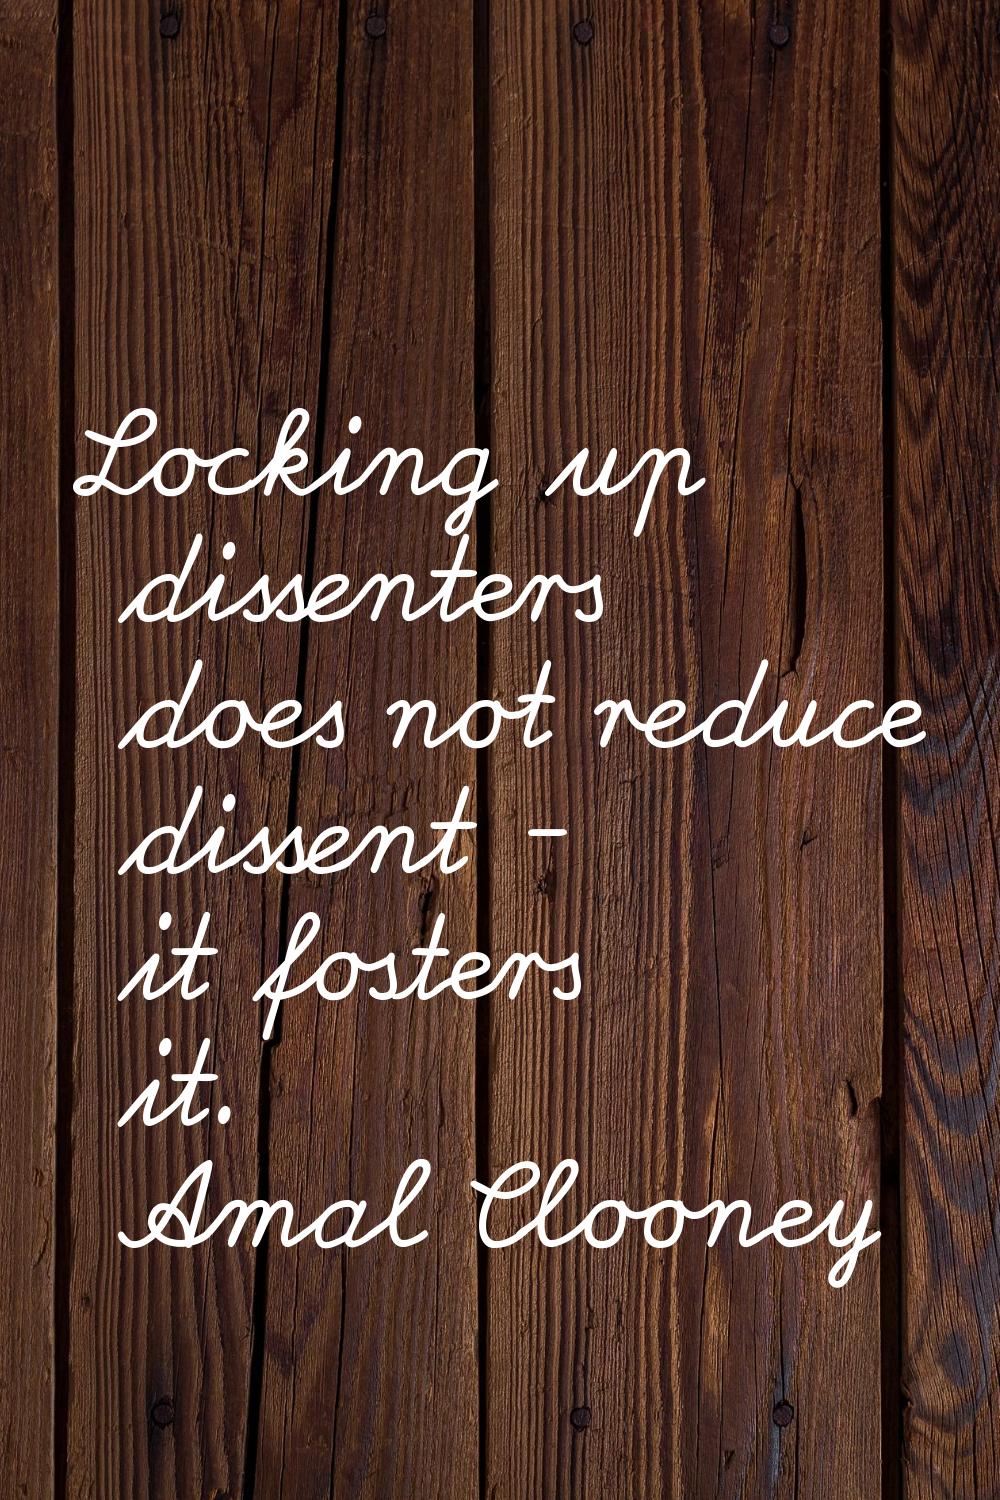 Locking up dissenters does not reduce dissent - it fosters it.